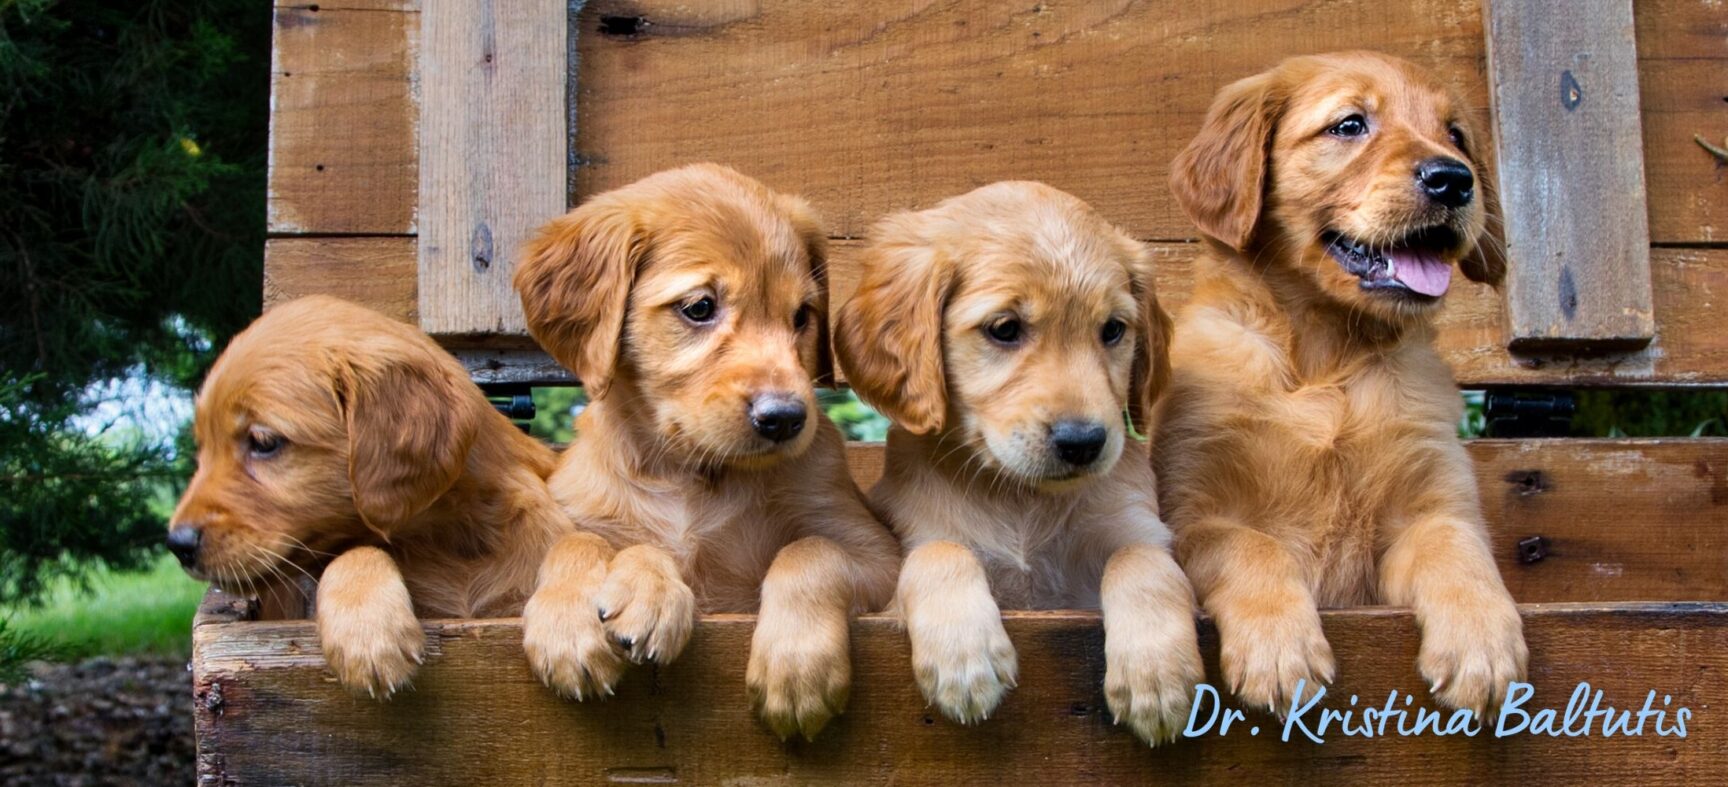 How to Find a Responsible Dog Breeder Well Bred